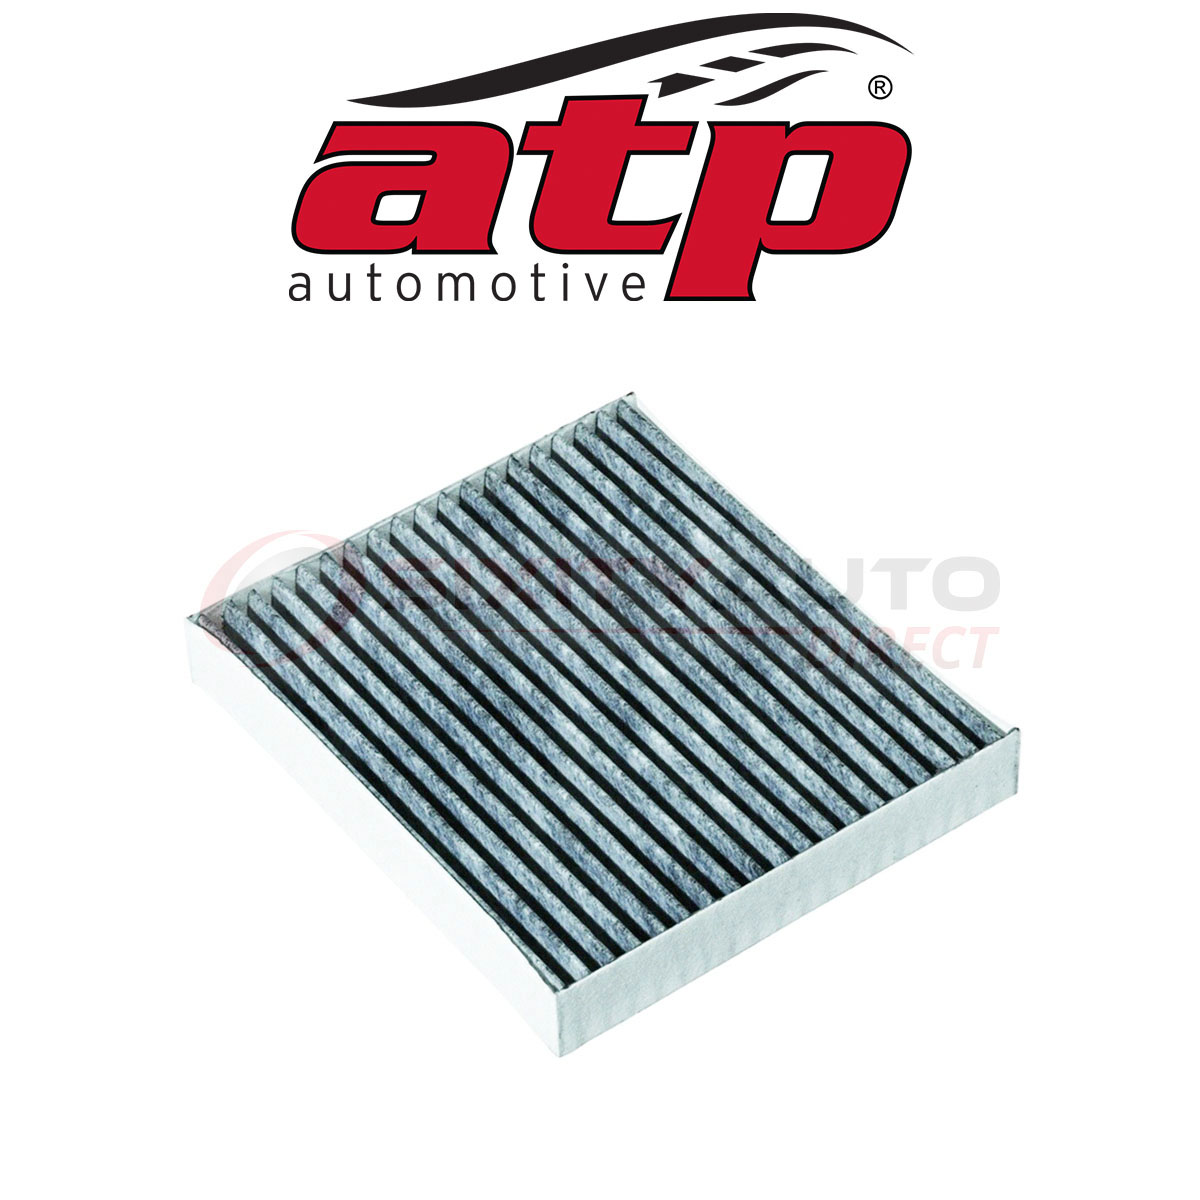 ATP Automotive Cabin Air Filter for 2007-2016 Toyota Camry 2.4L 2.5L 3.5L L4 kc | eBay 2016 Toyota Camry Se Cabin Air Filter